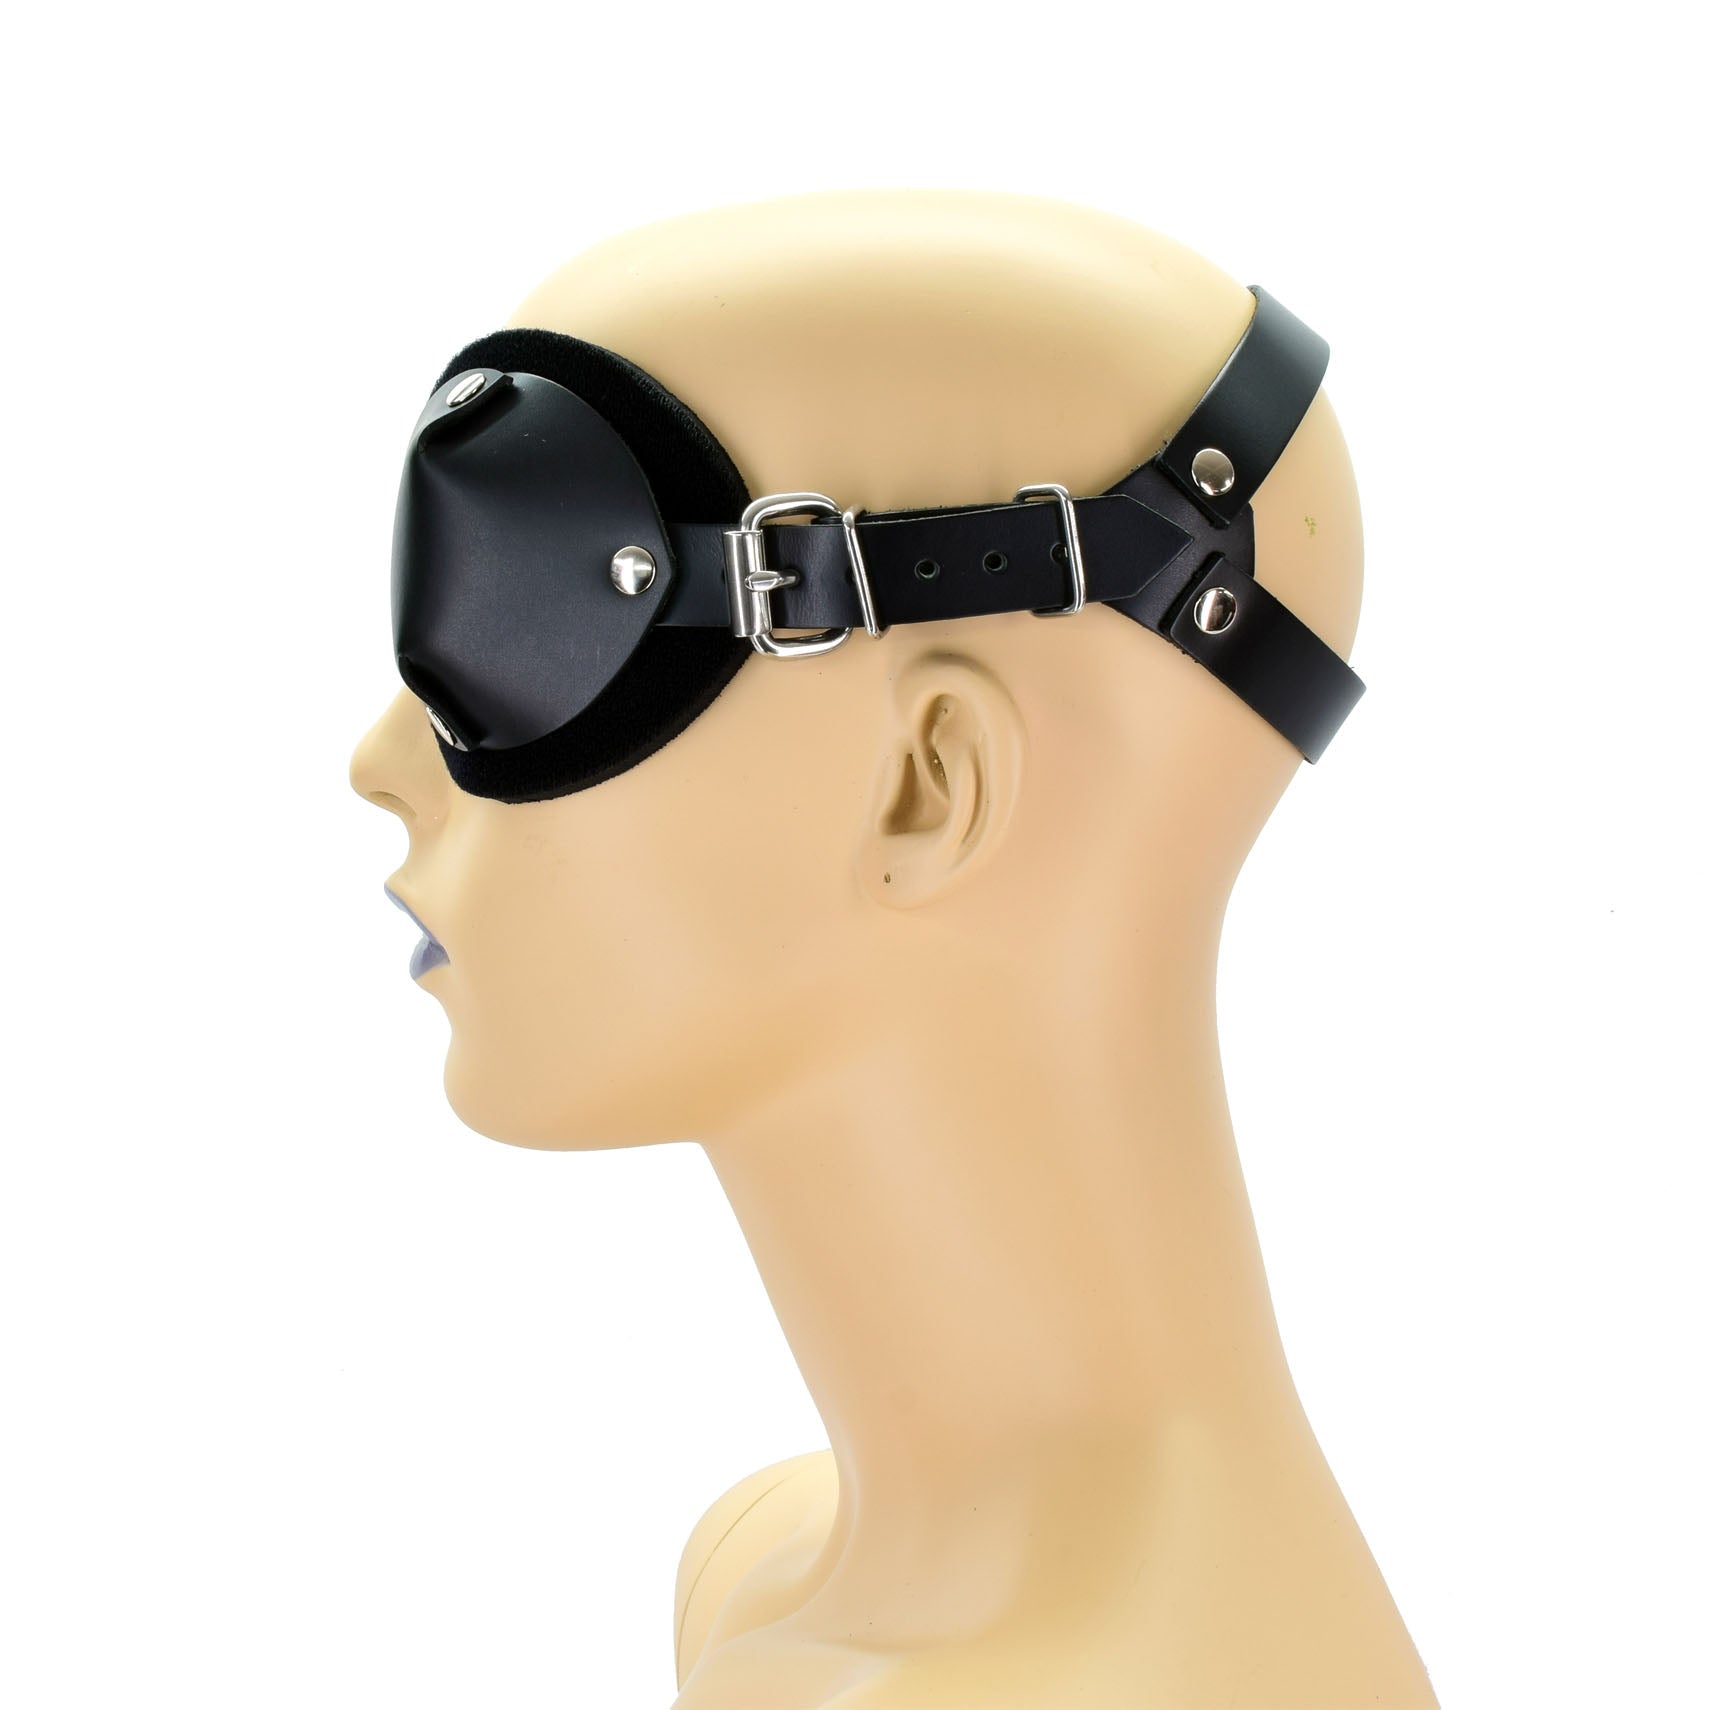 A mannequin head displaying the leather Ultimate Blindfold, left side view.